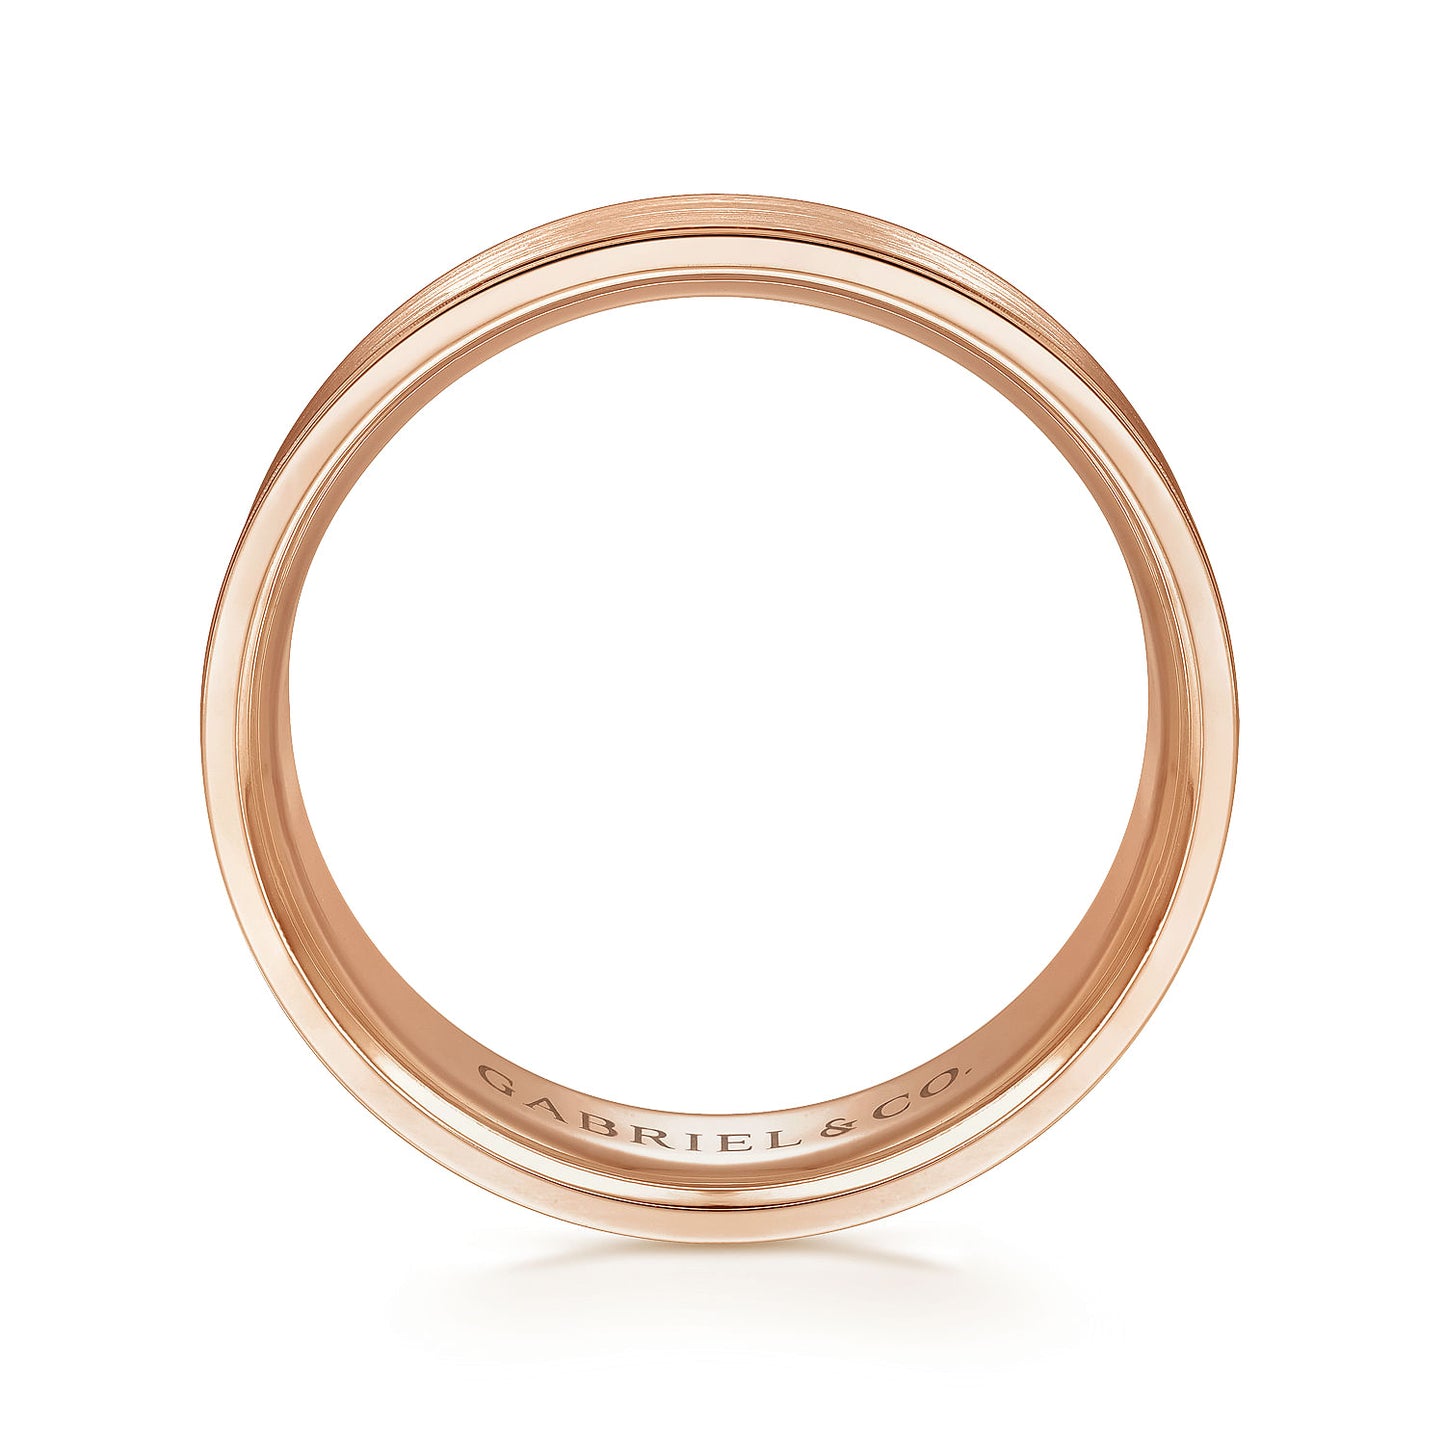 Gabriel & Co Rose Gold Wedding Band With A Satin Center And Polished Beveled Edges - Gold Wedding Bands - Men's